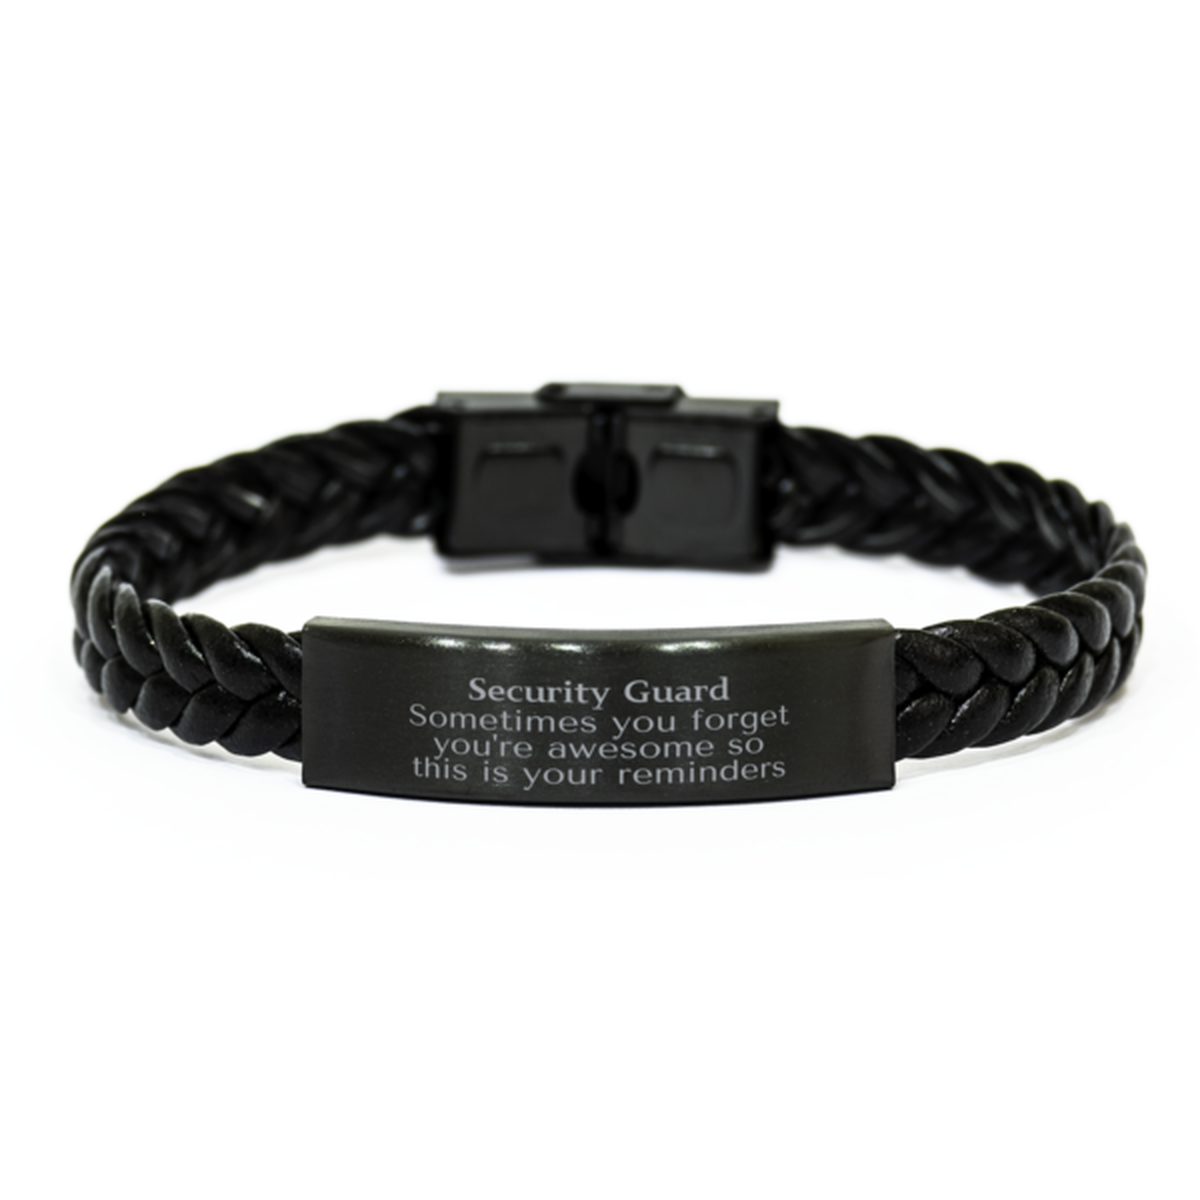 Sentimental Security Guard Braided Leather Bracelet, Security Guard Sometimes you forget you're awesome so this is your reminders, Graduation Christmas Birthday Gifts for Security Guard, Men, Women, Coworkers